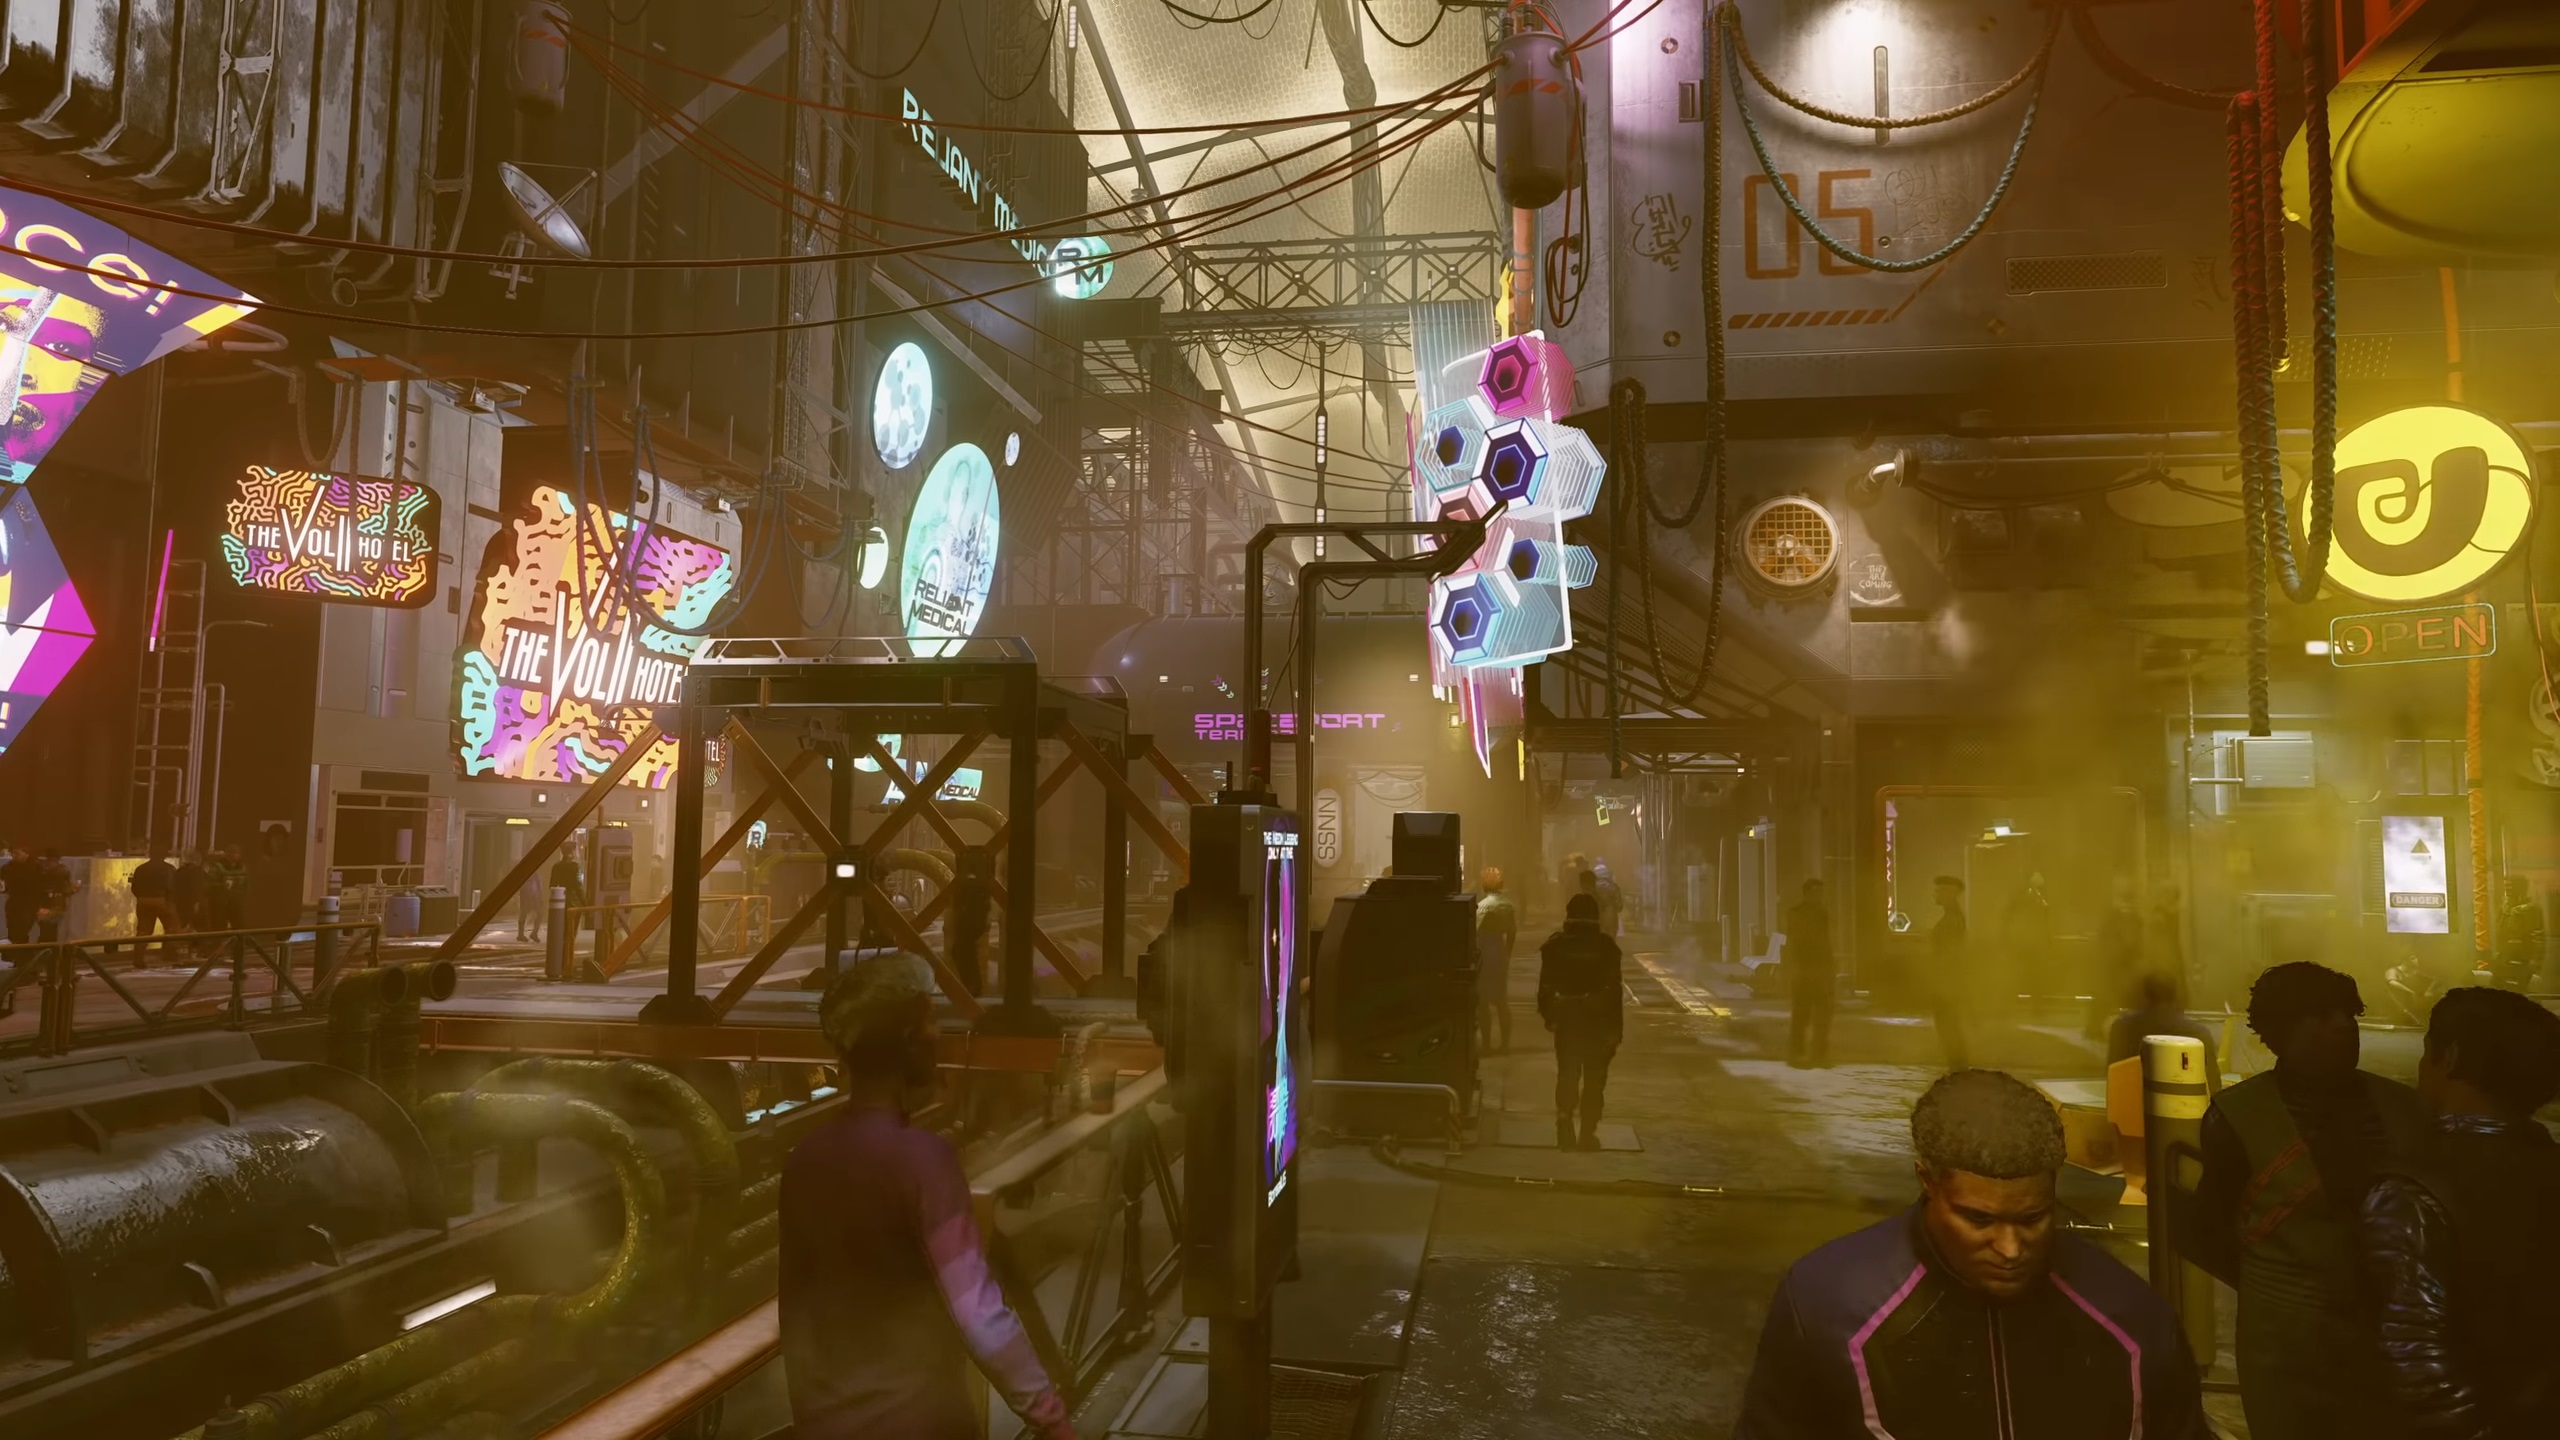 Starfield cities - Neon, an indoor market covered with mist and neon shop lights.